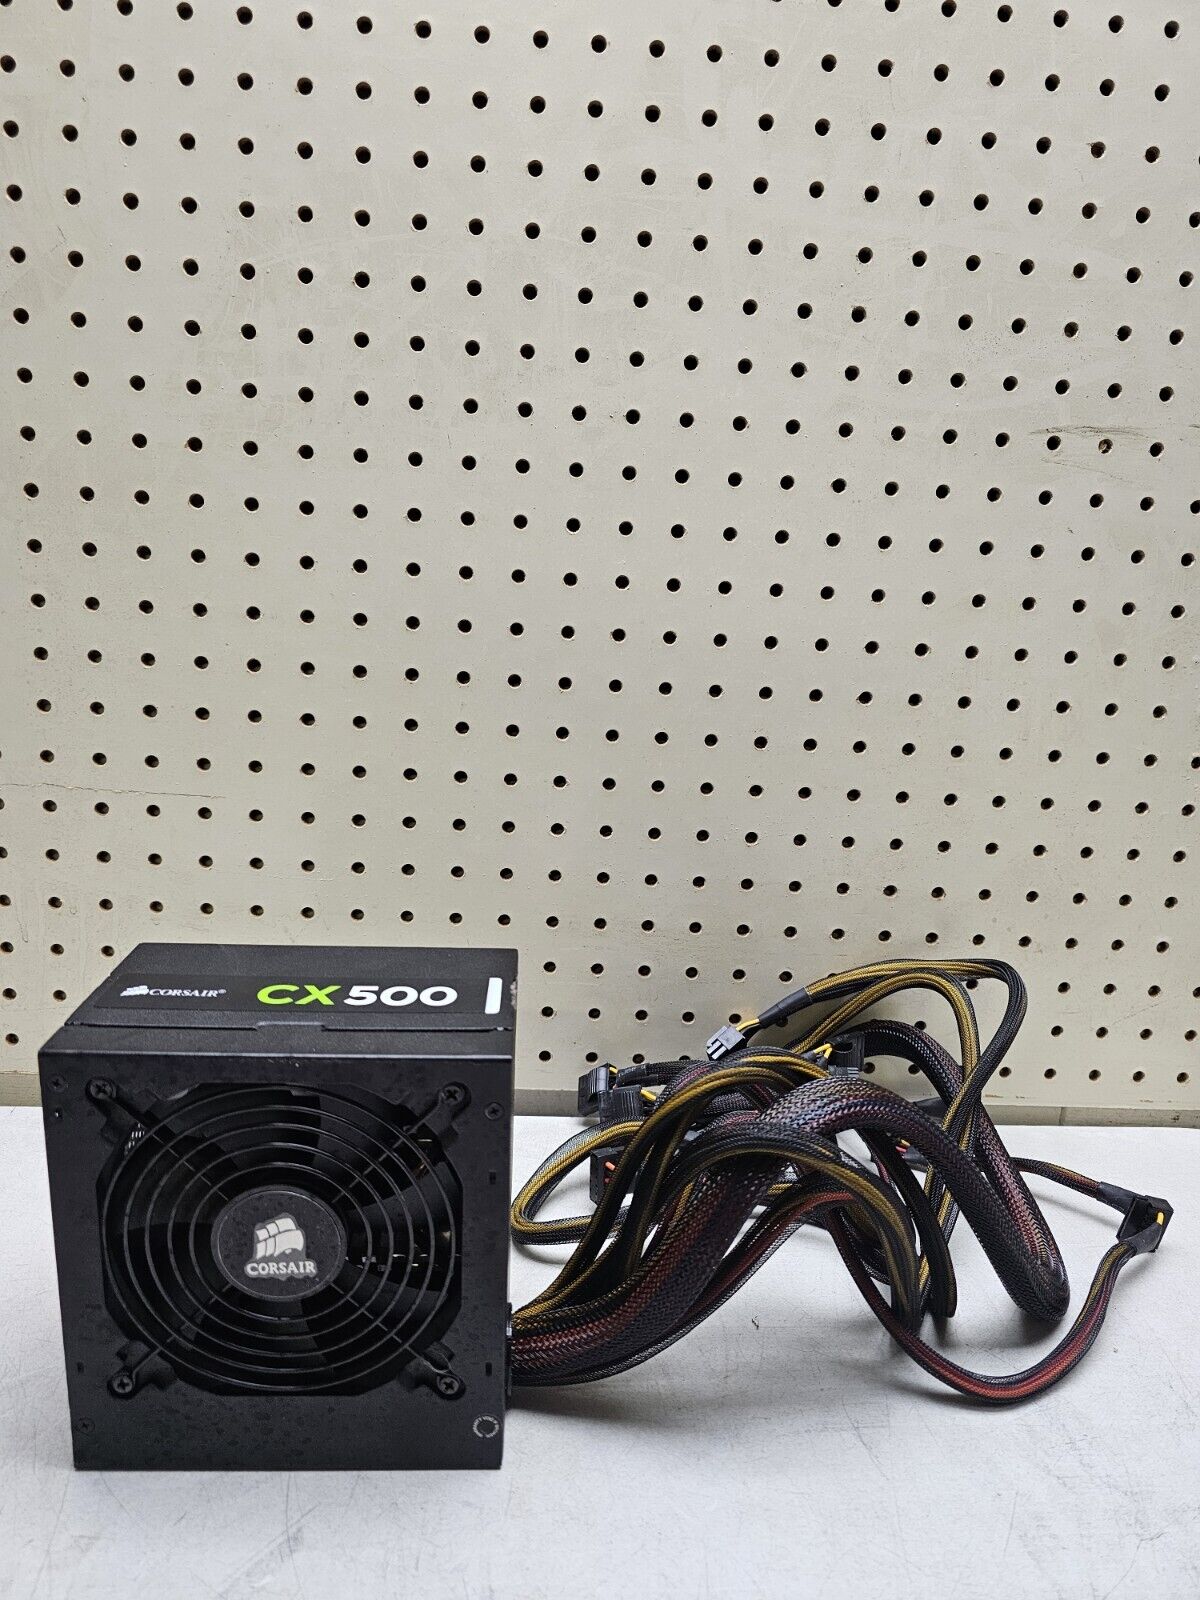 Corsair CX500 500W Desktop Power Supply 500W Model: 75-001667 Tested and Works